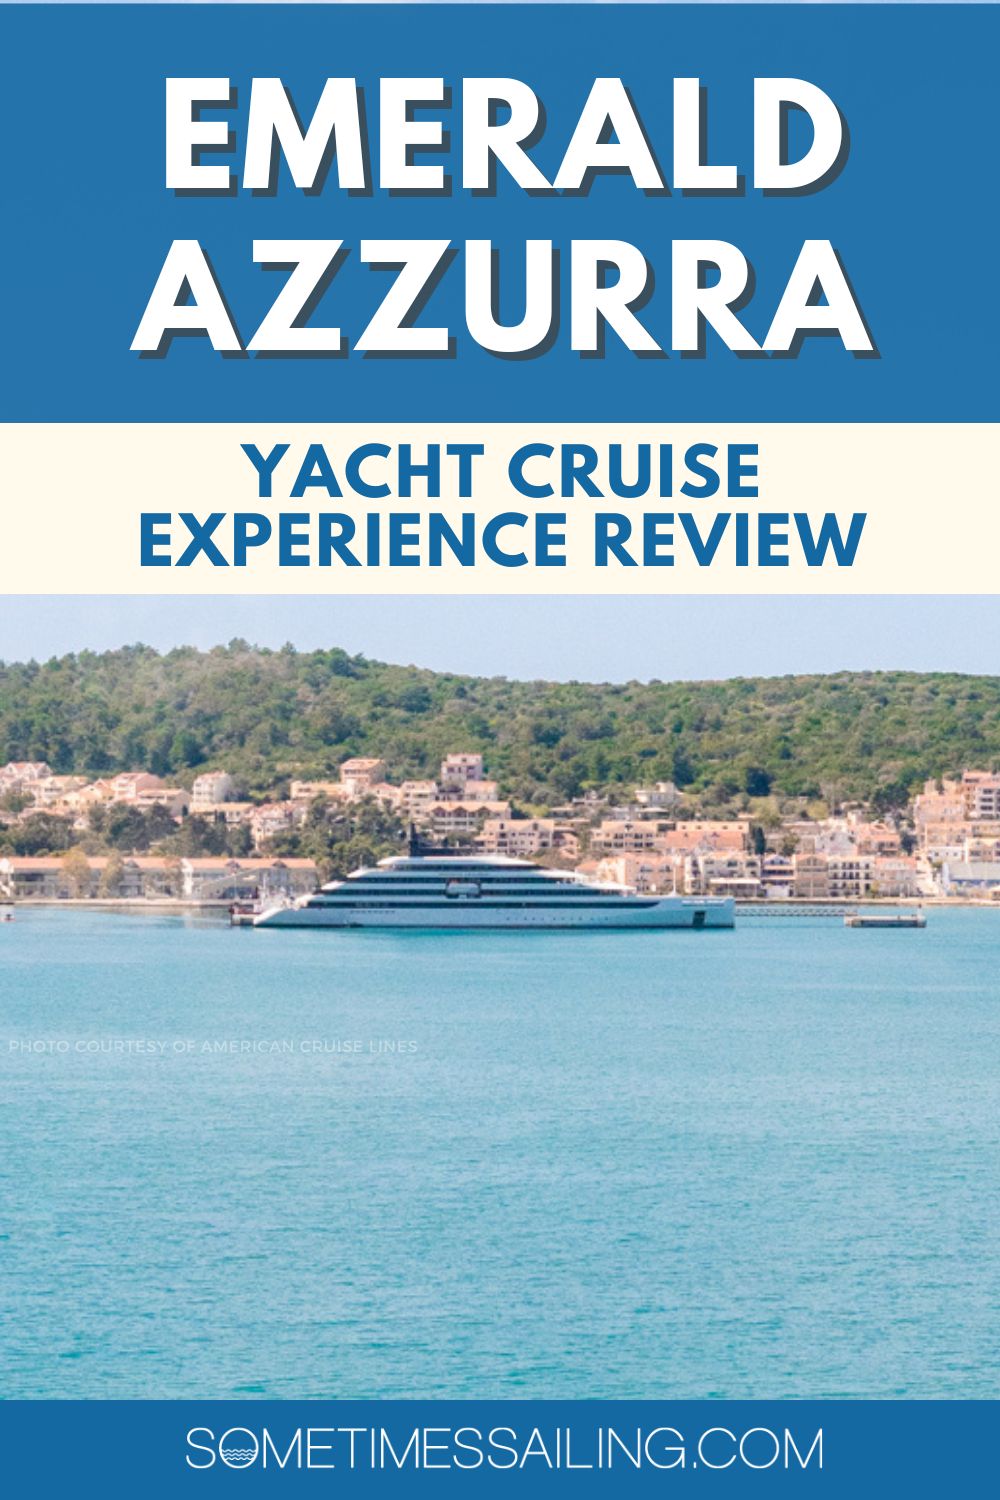 Emerald Azzurra yacht cruise experience review with a picture of the yacht ship in the distance in blue water with mountains in the background.